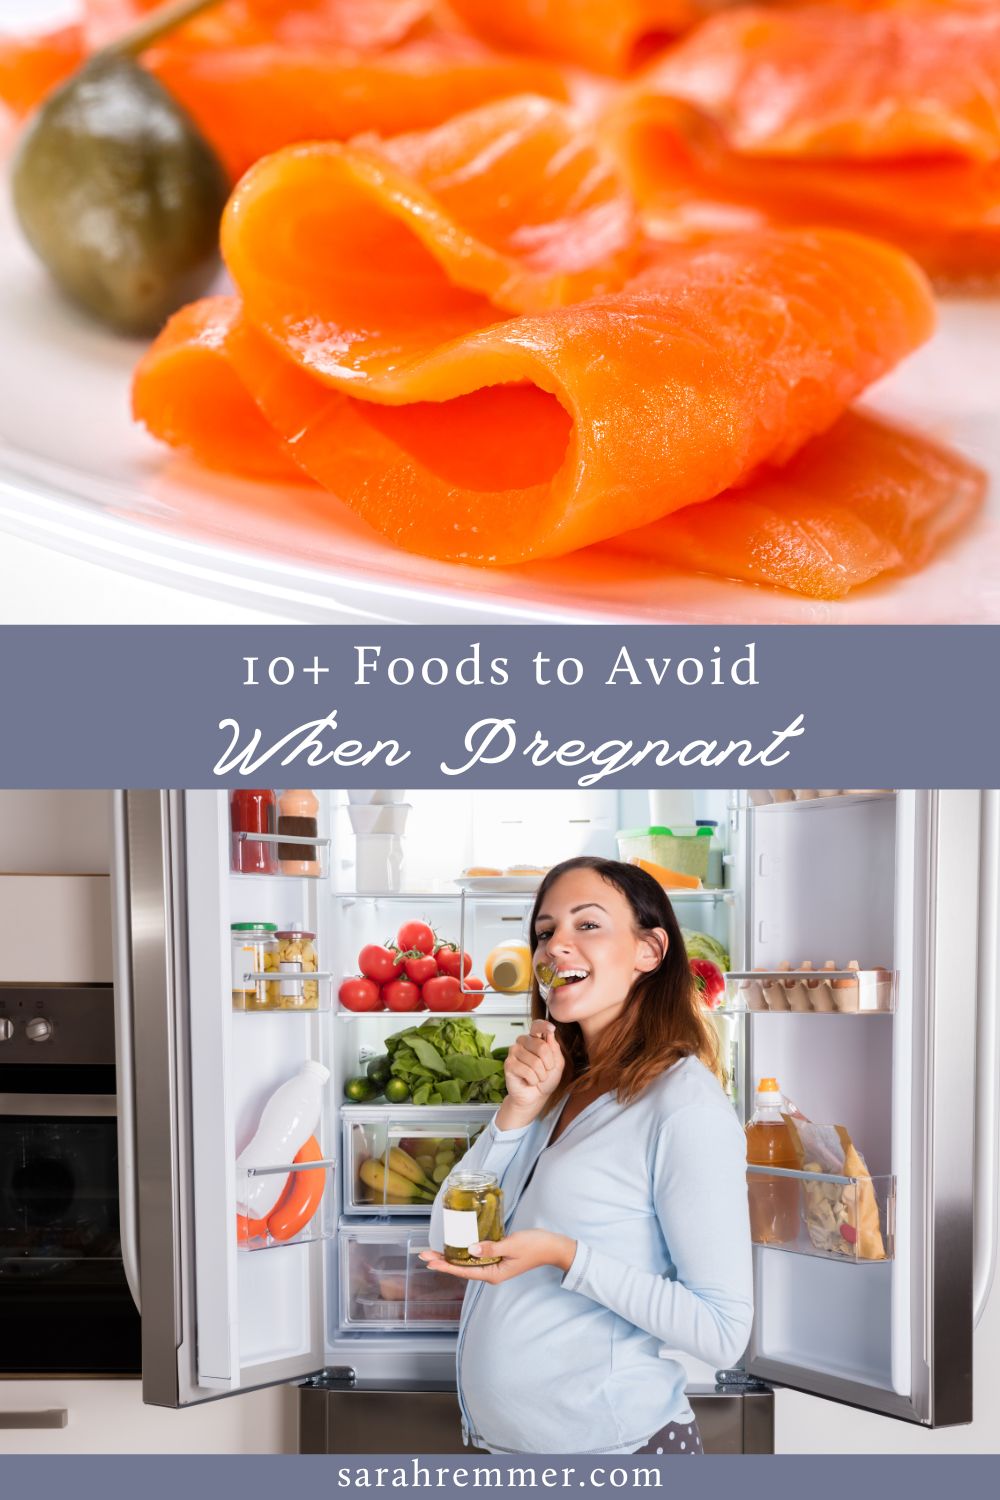 Wondering which foods you should avoid when you’re pregnant? In this detailed post, registered dietitian Sarah Remmer shares pregnancy nutrition advice.